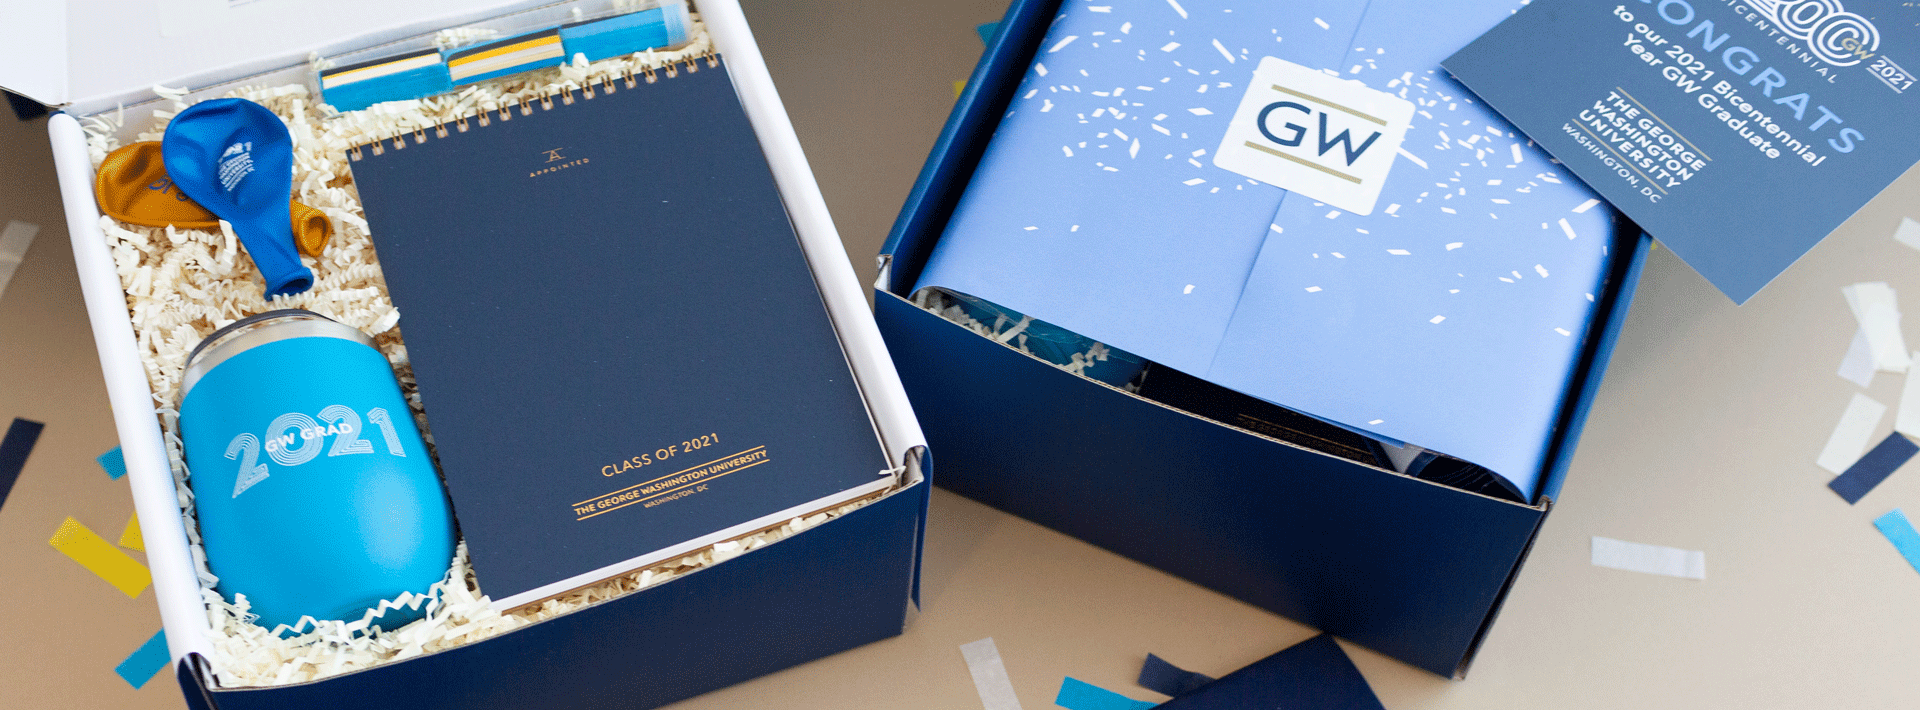 virtual graduation gifts for gw with branded packaging and celebration products